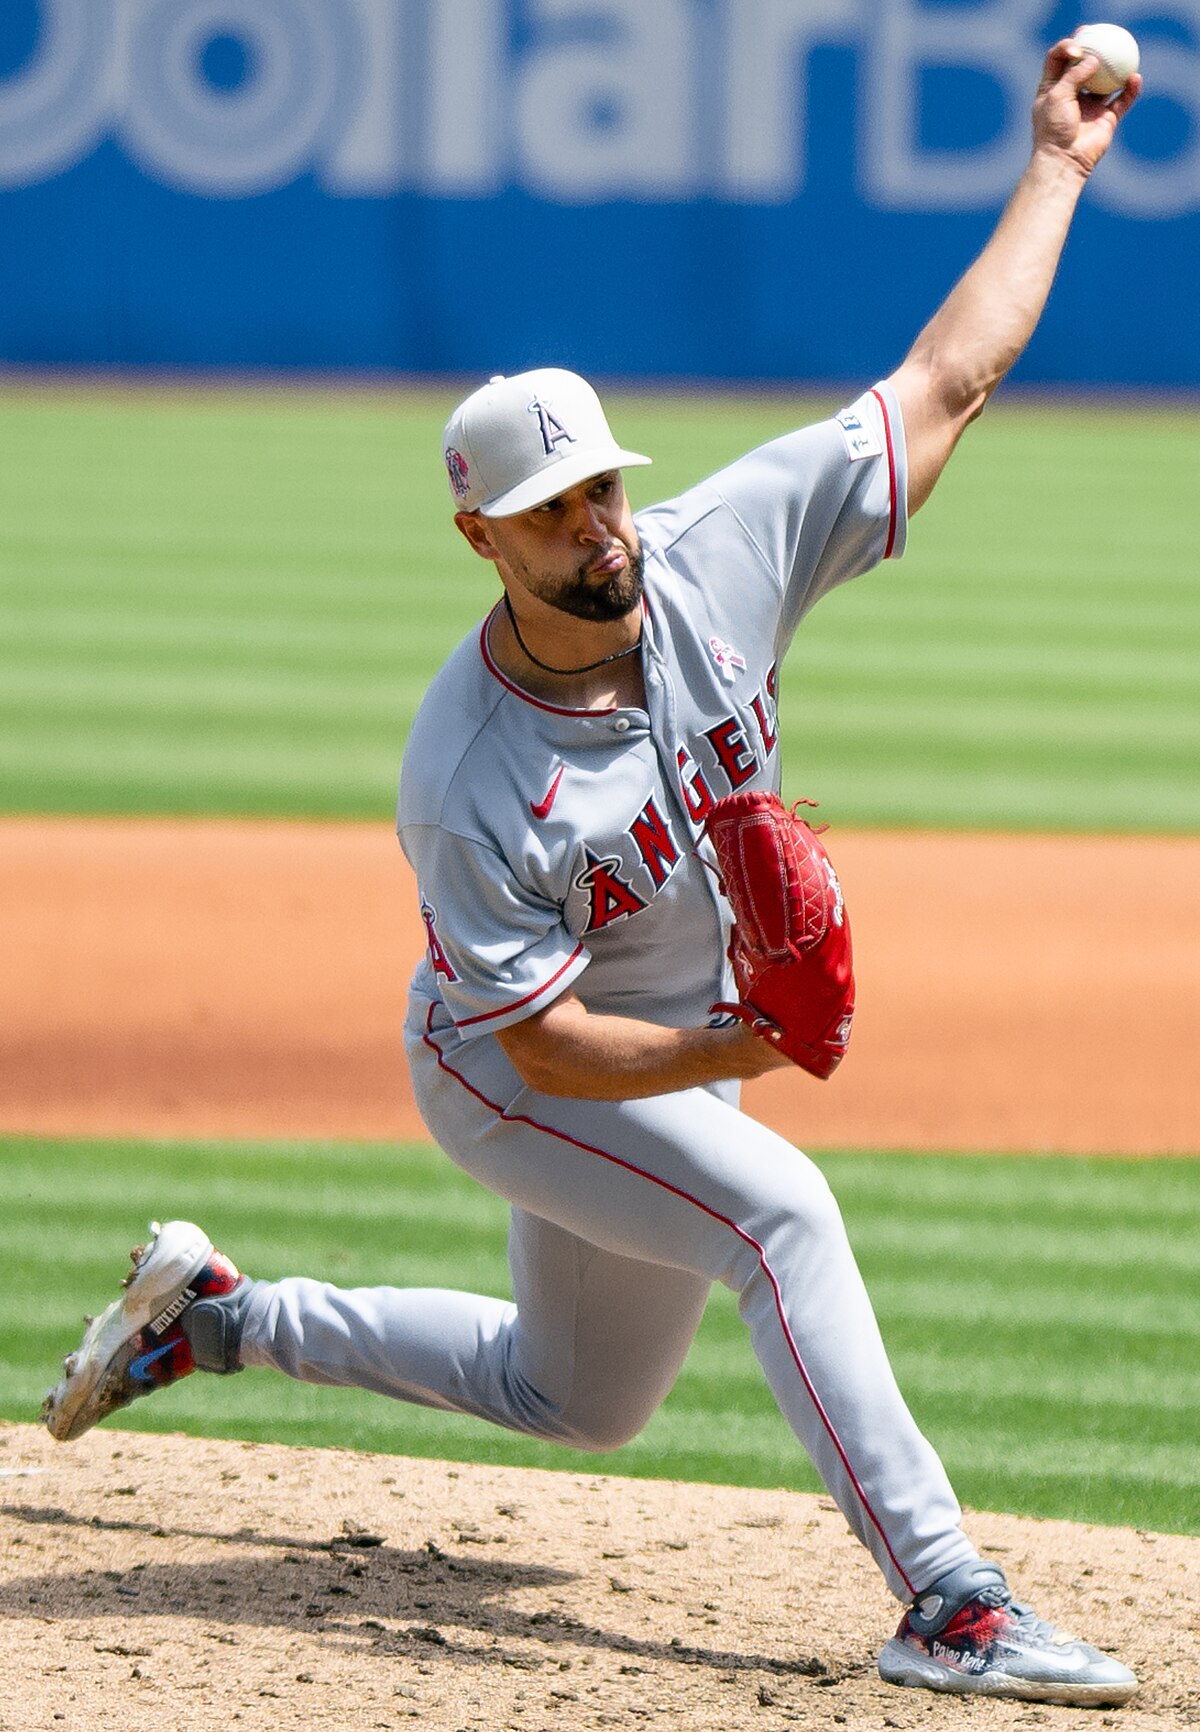 Relief pitcher - Wikipedia